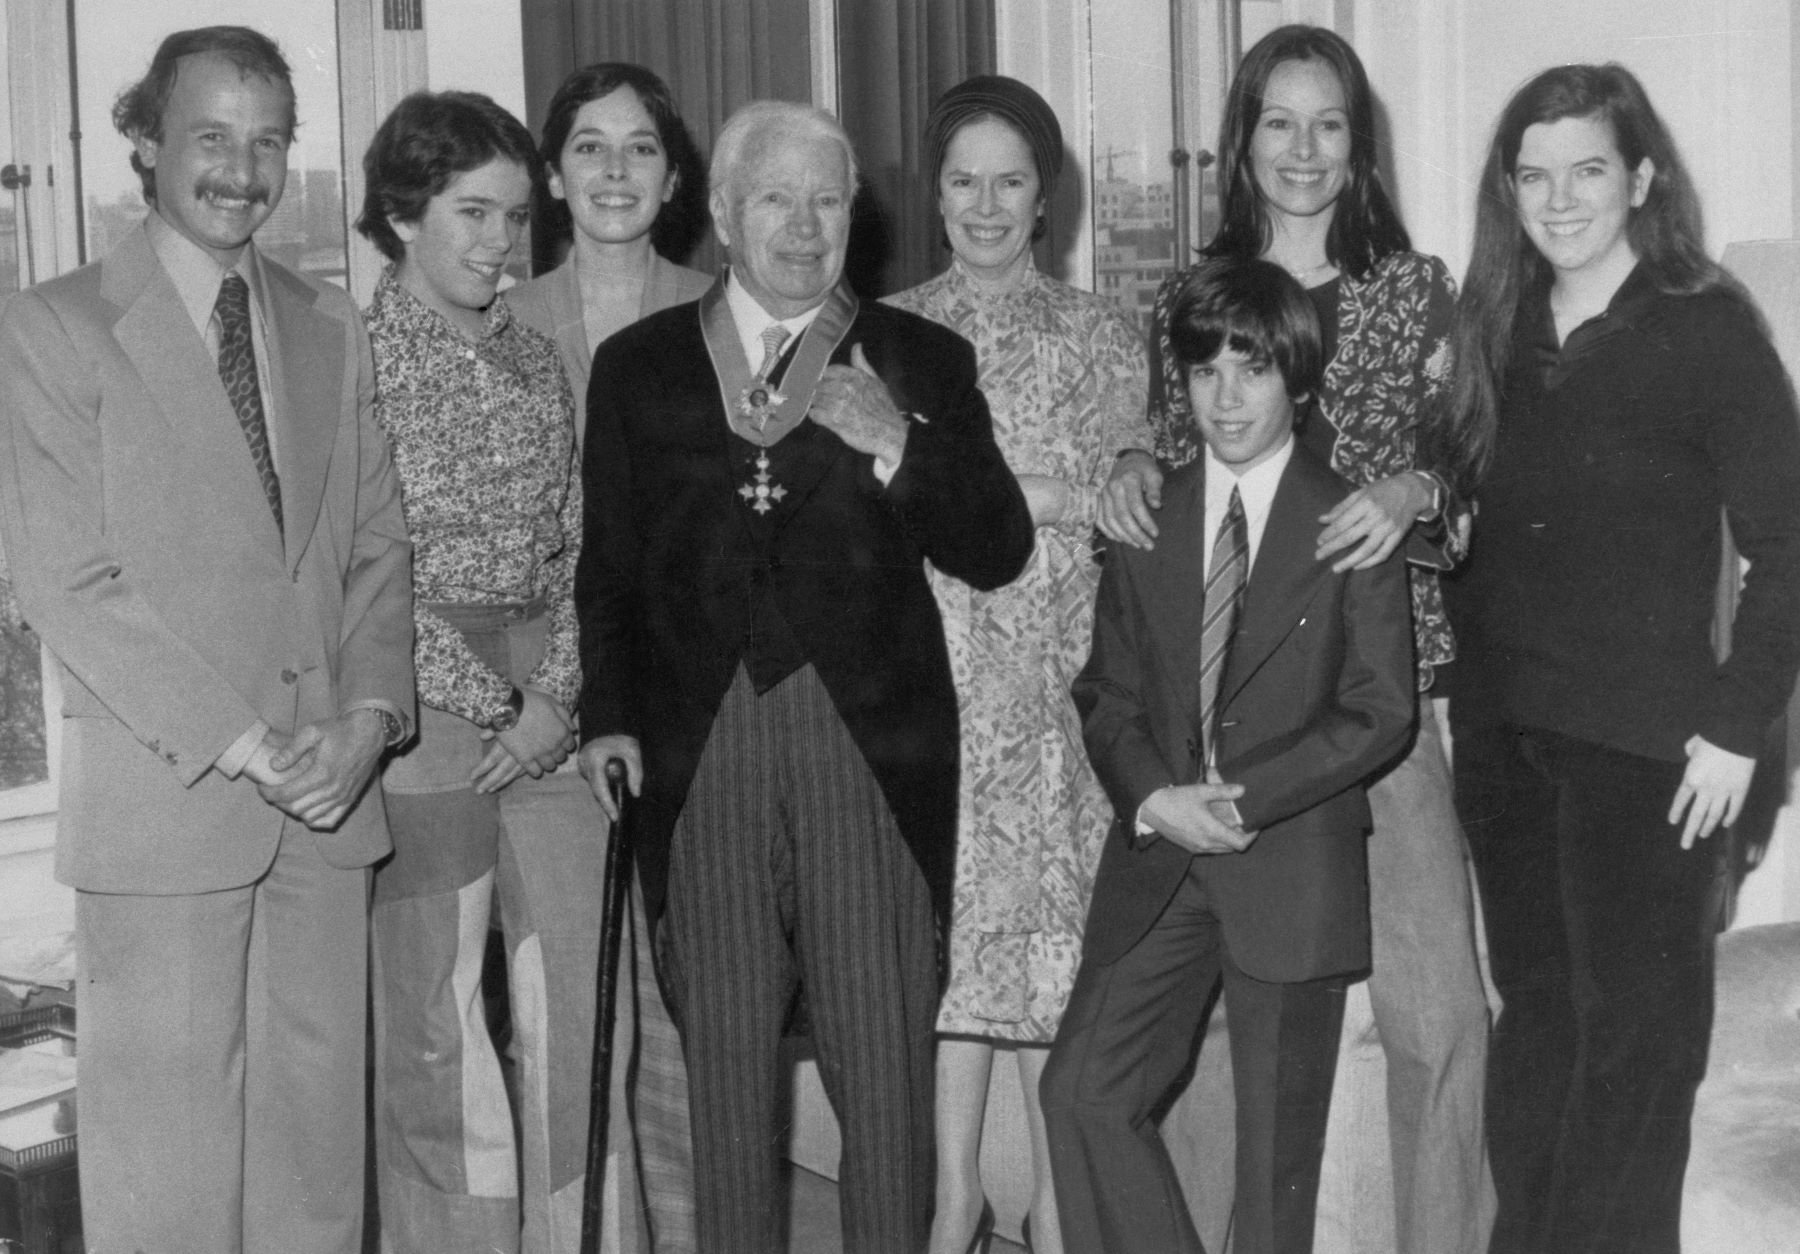 Charlie Chaplin with family at the Savoy Hotel after being knighted by Queen Elizabeth II at Buckingham Palace